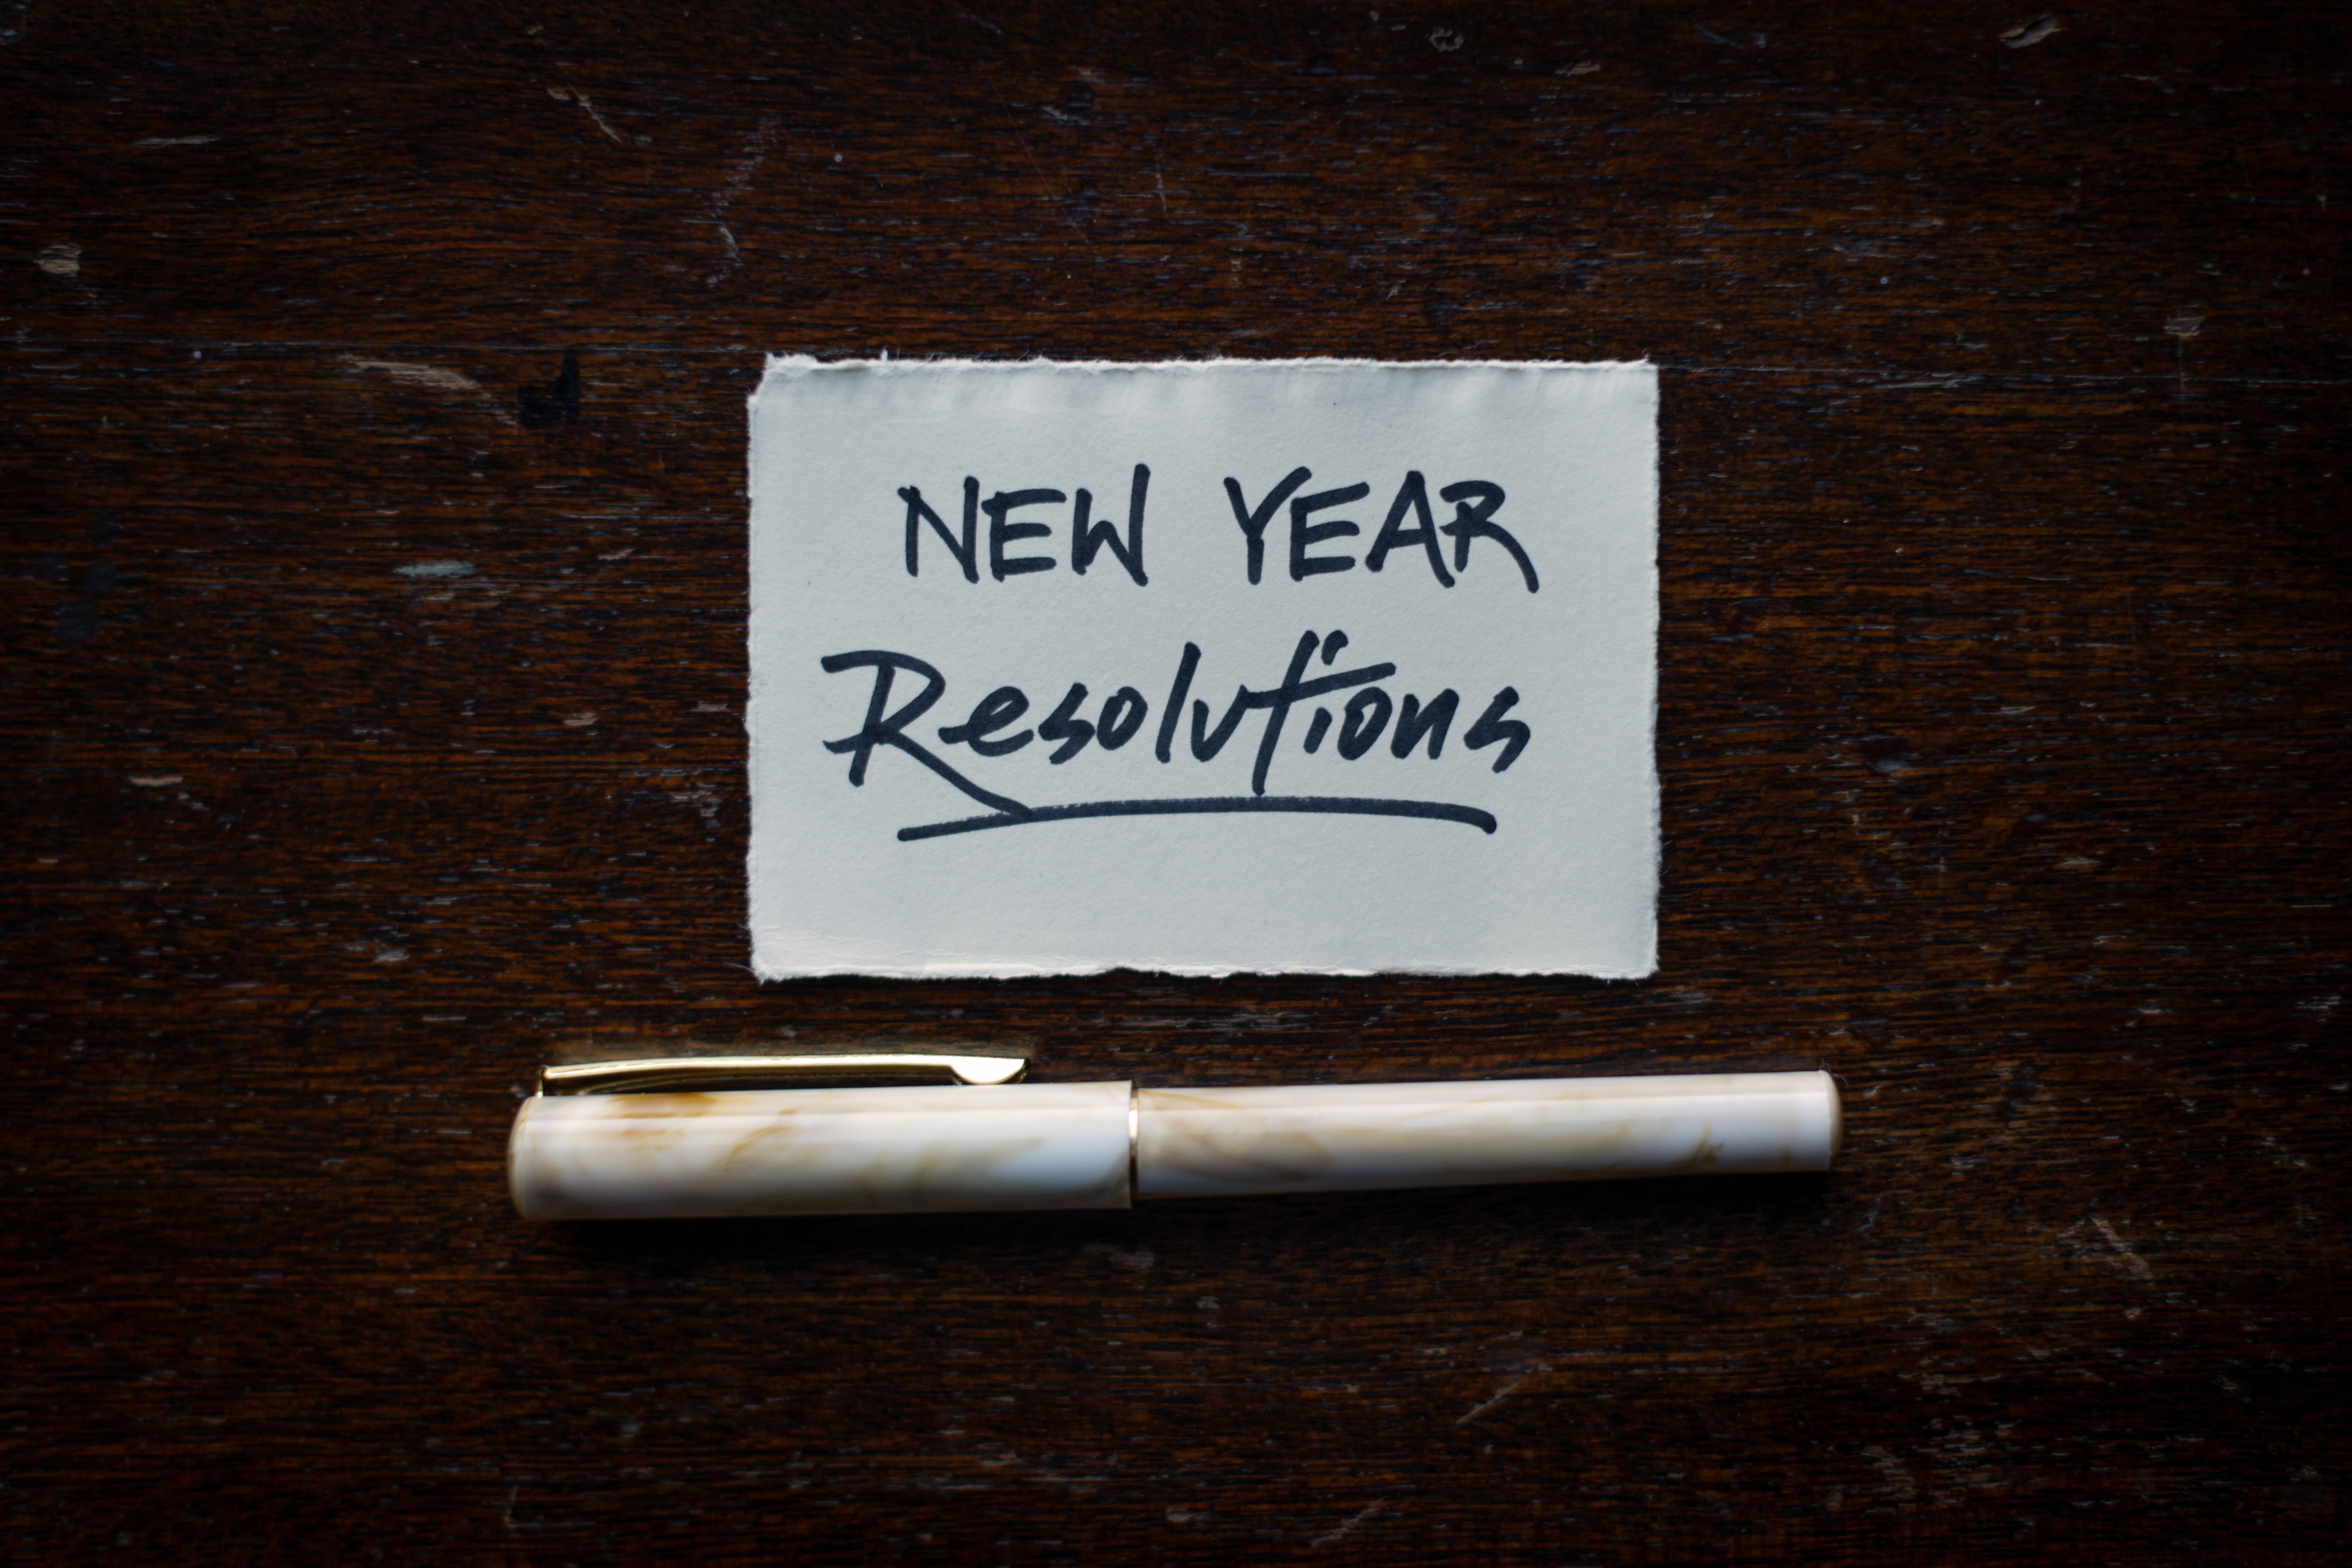 Is It Time for a “Resolution Rewind”?